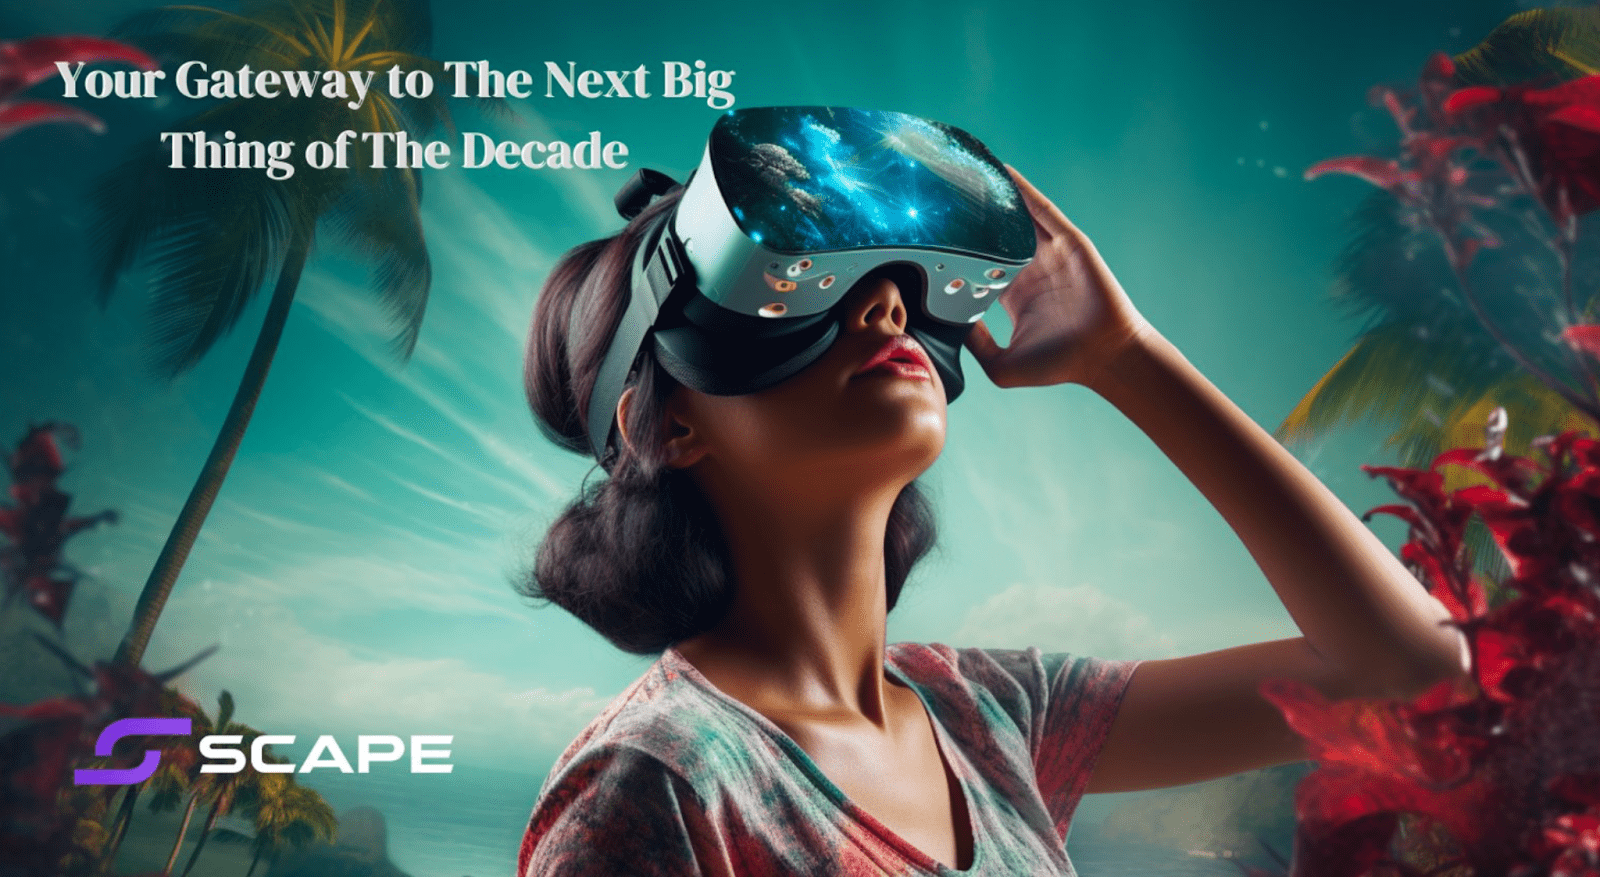 5thScape Raises More Than $1 Million In World-First VR/AR Crypto Offering, Presale Now Live 